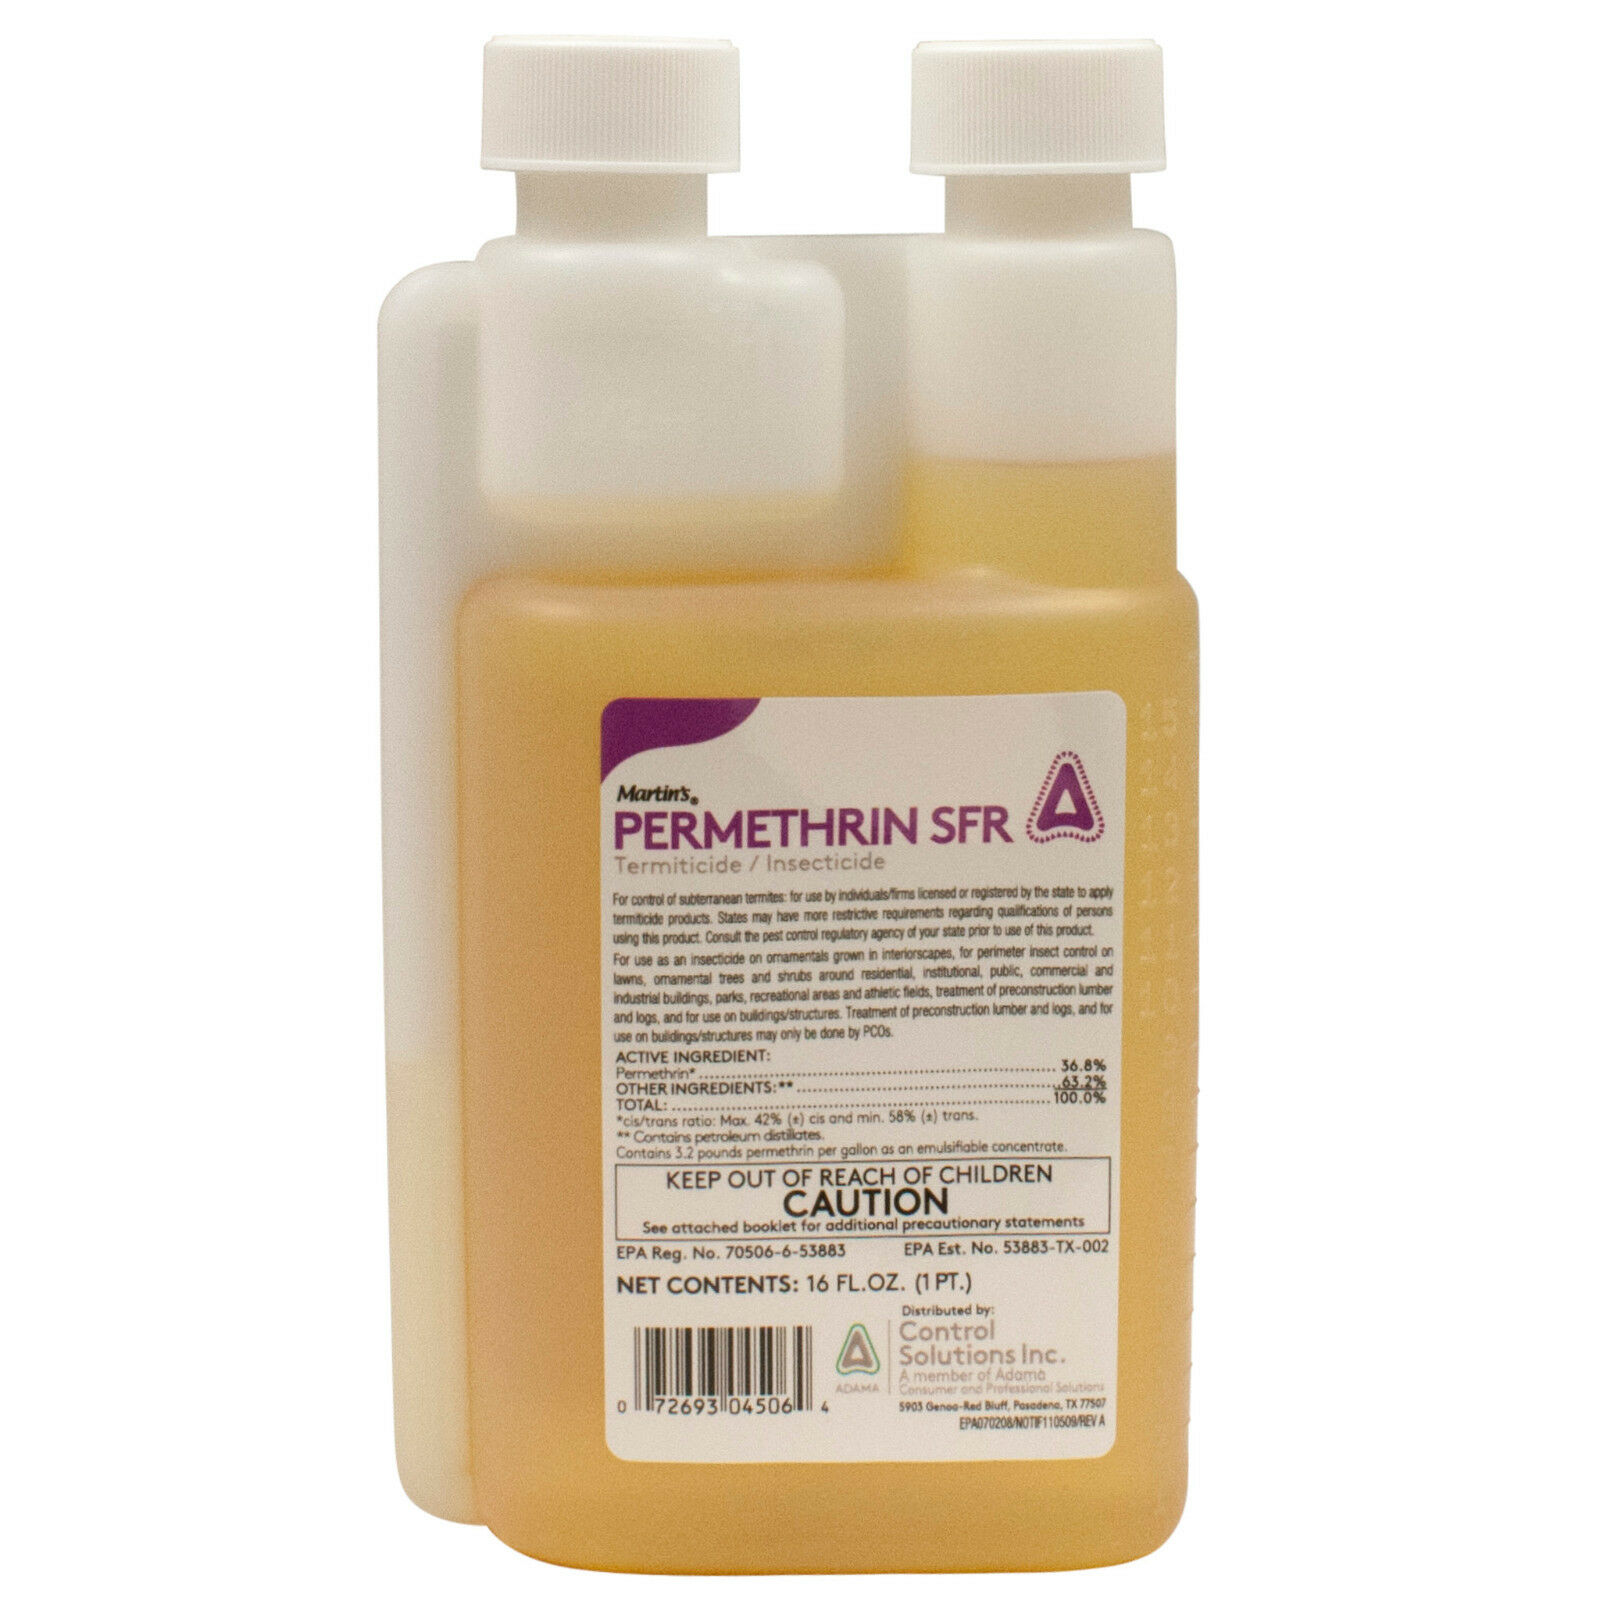 Permethrin Sfr 36.8% Insecticide Termiticide 1 Pint  - Not For Sale To: Ny, Ct